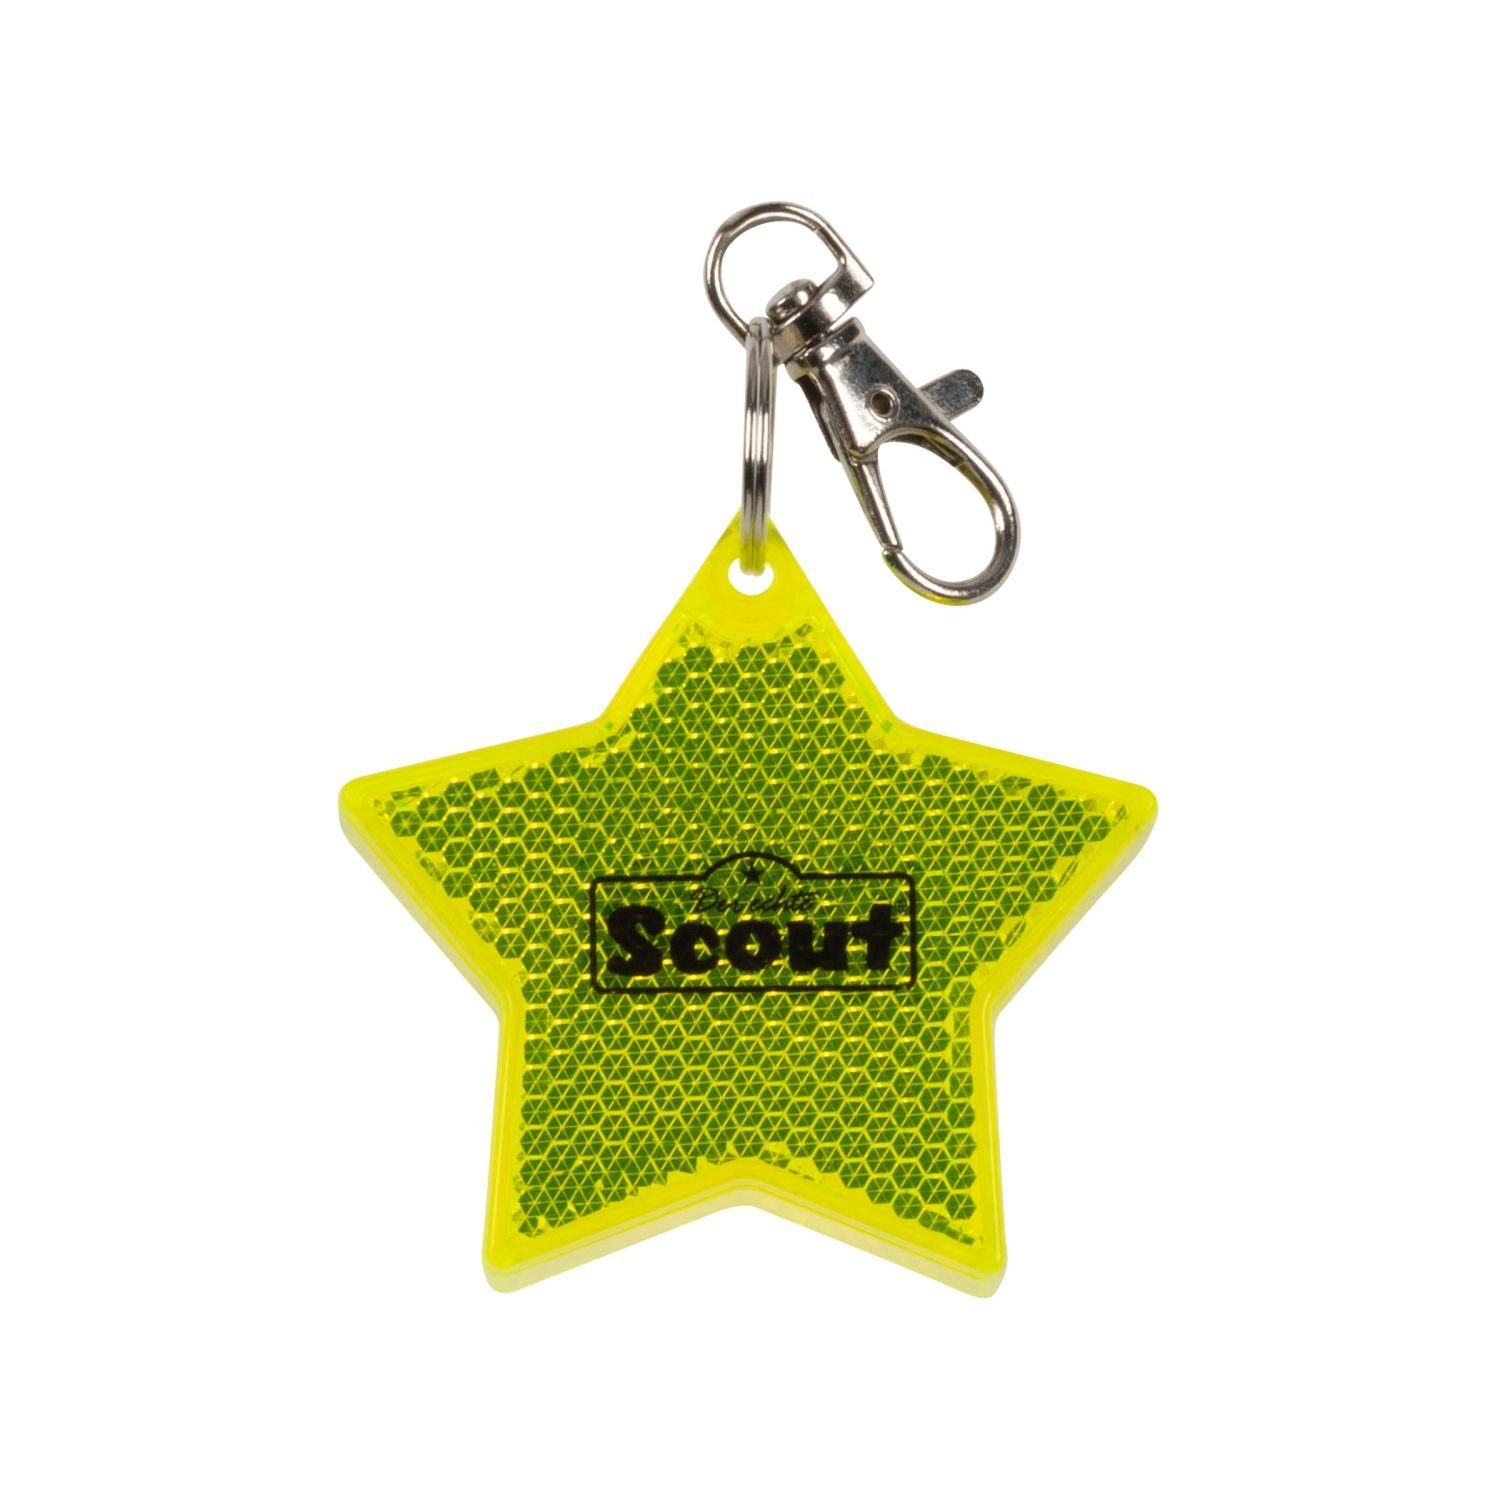 Scout Scout Blinky Yellow Star Babystiefel